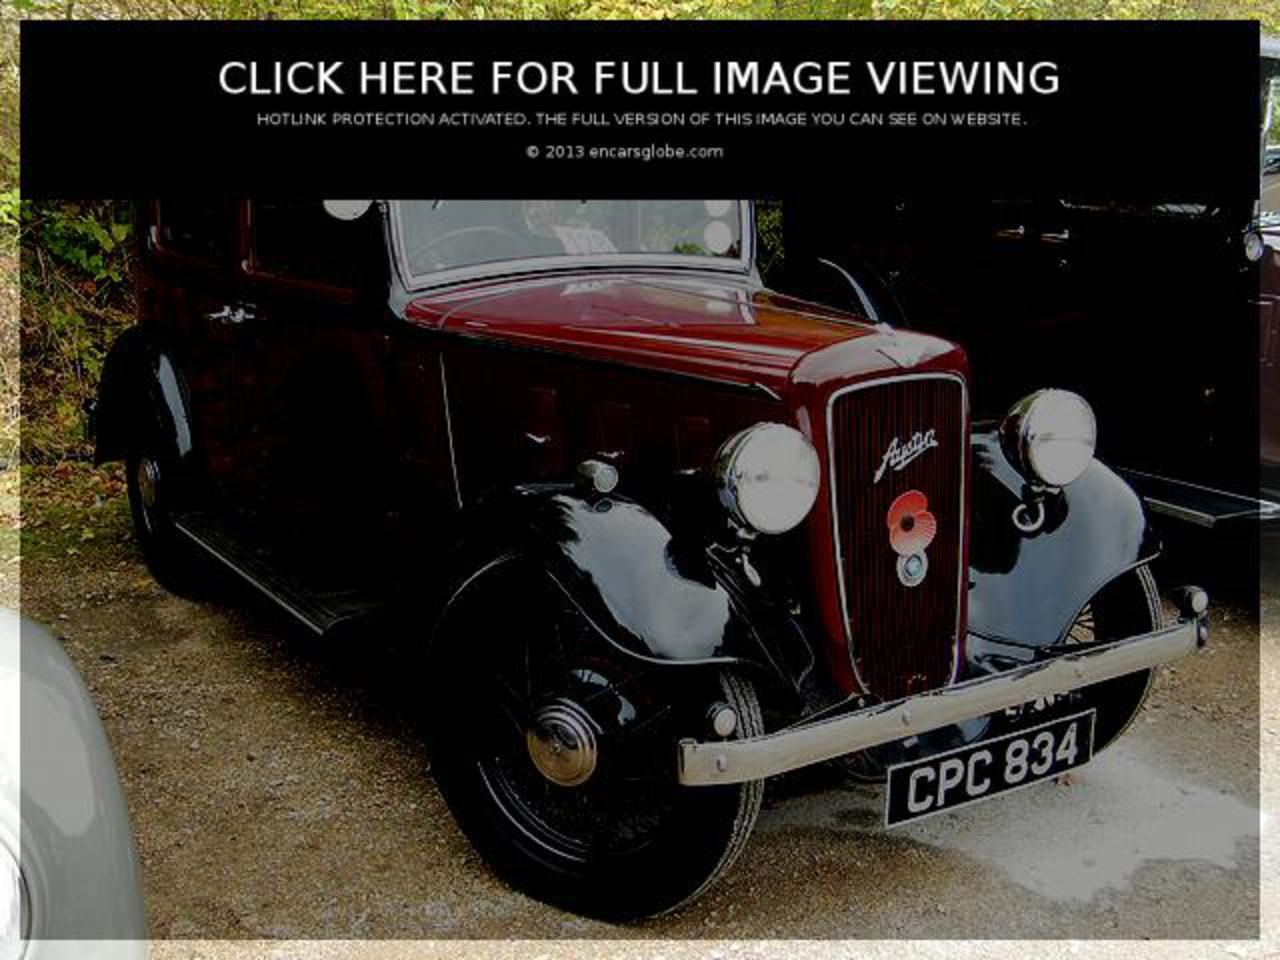 Austin 10 Lichfield saloon Photo Gallery: Photo #11 out of 11 ...